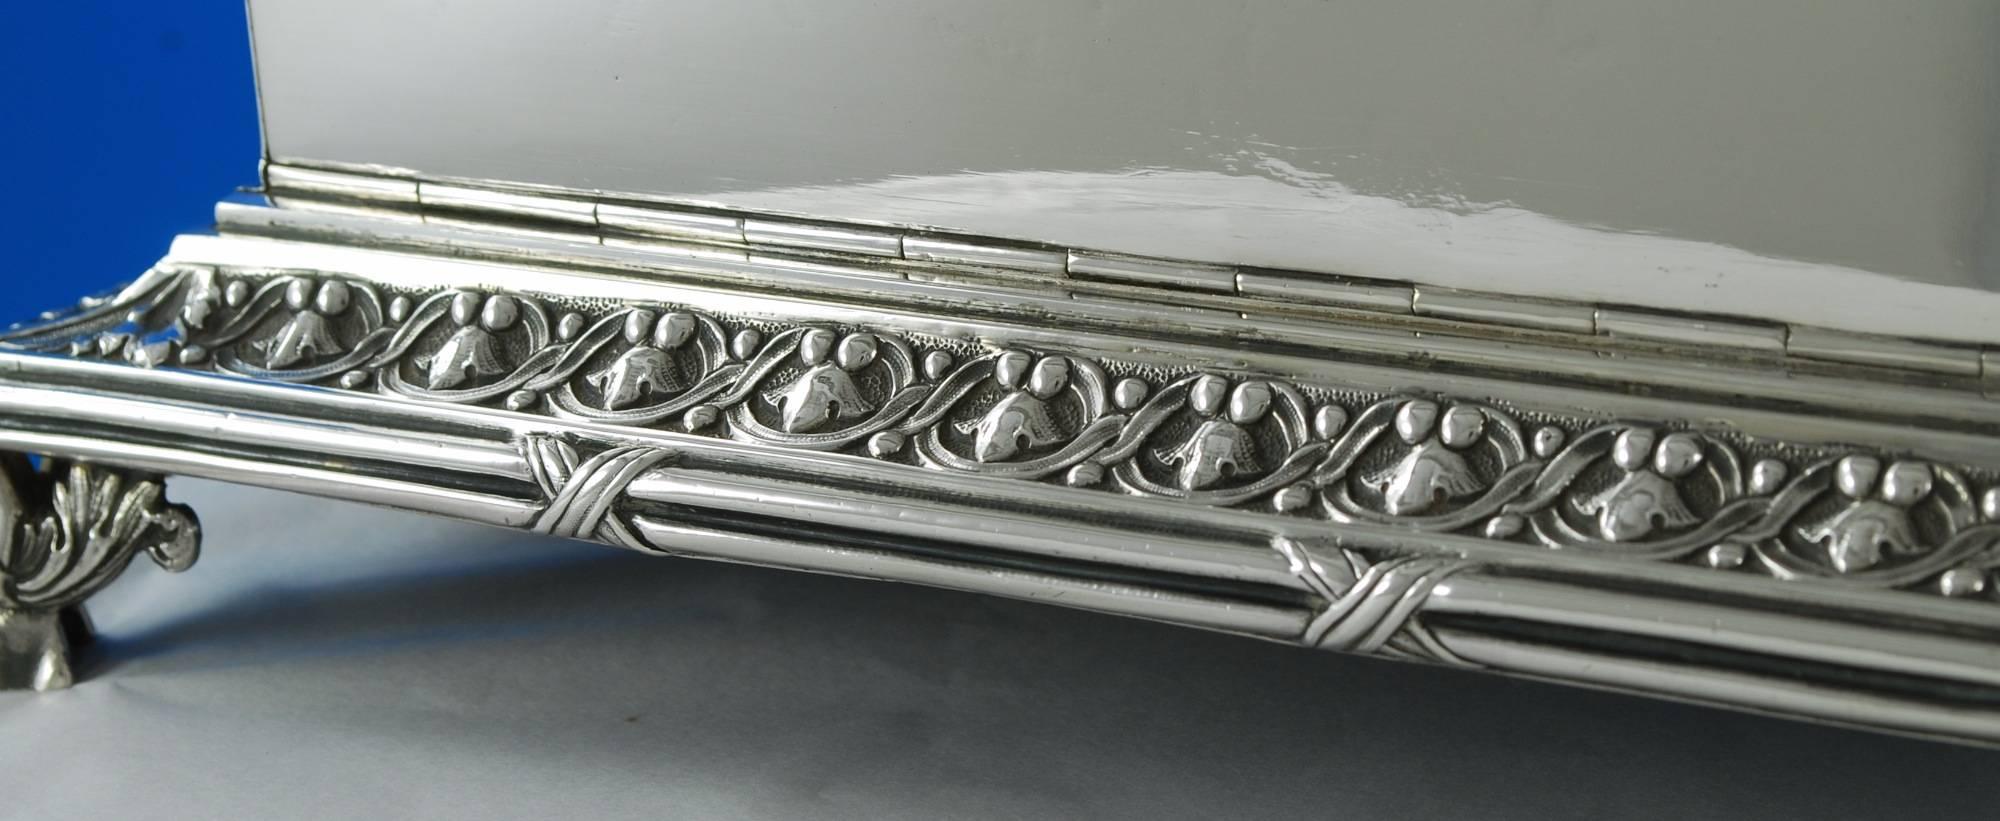 Unusual and Very Fine Quality French Silver Humidor For Sale 1